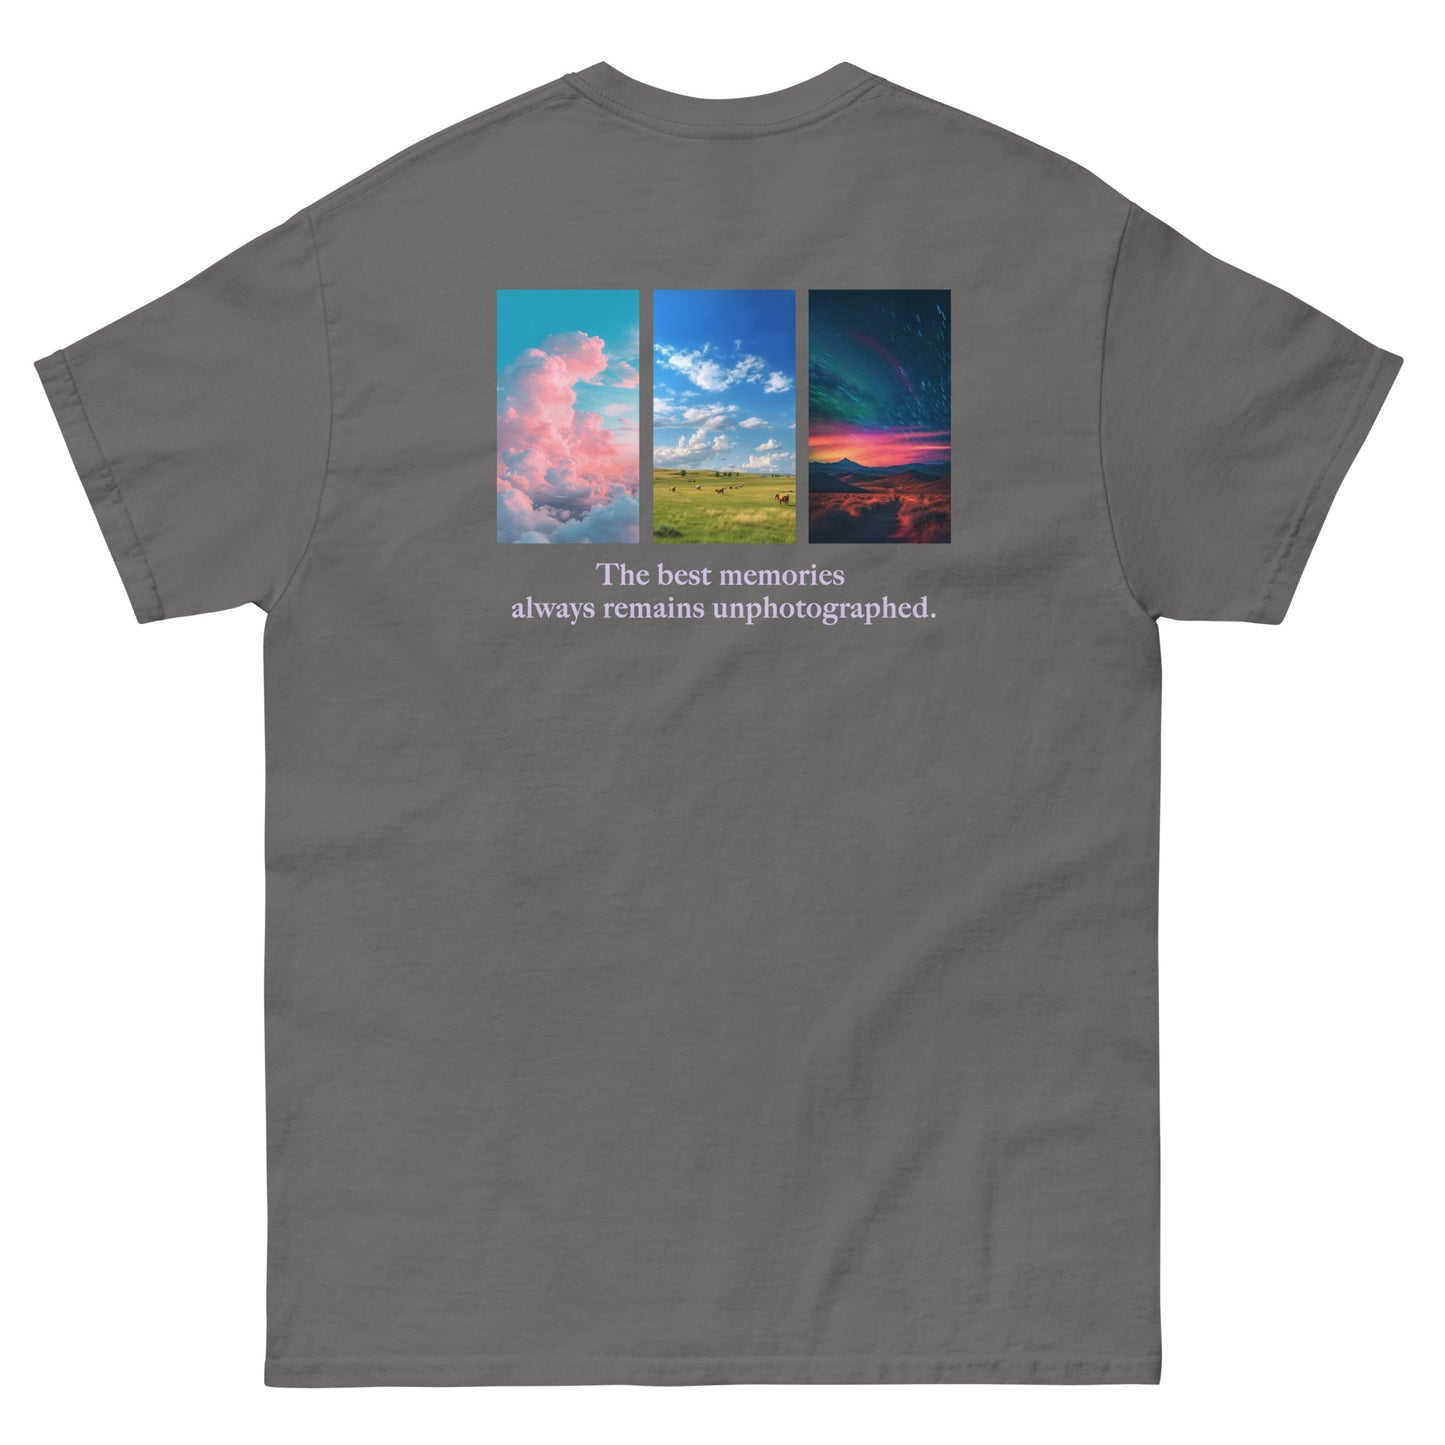 Dark Gray High Quality Tee - Front Design with "The best memories always remains unphotographed " print on left chest - Back Design with a Phrase "The best memories always remains unphotographed." print and three pictures of sky.